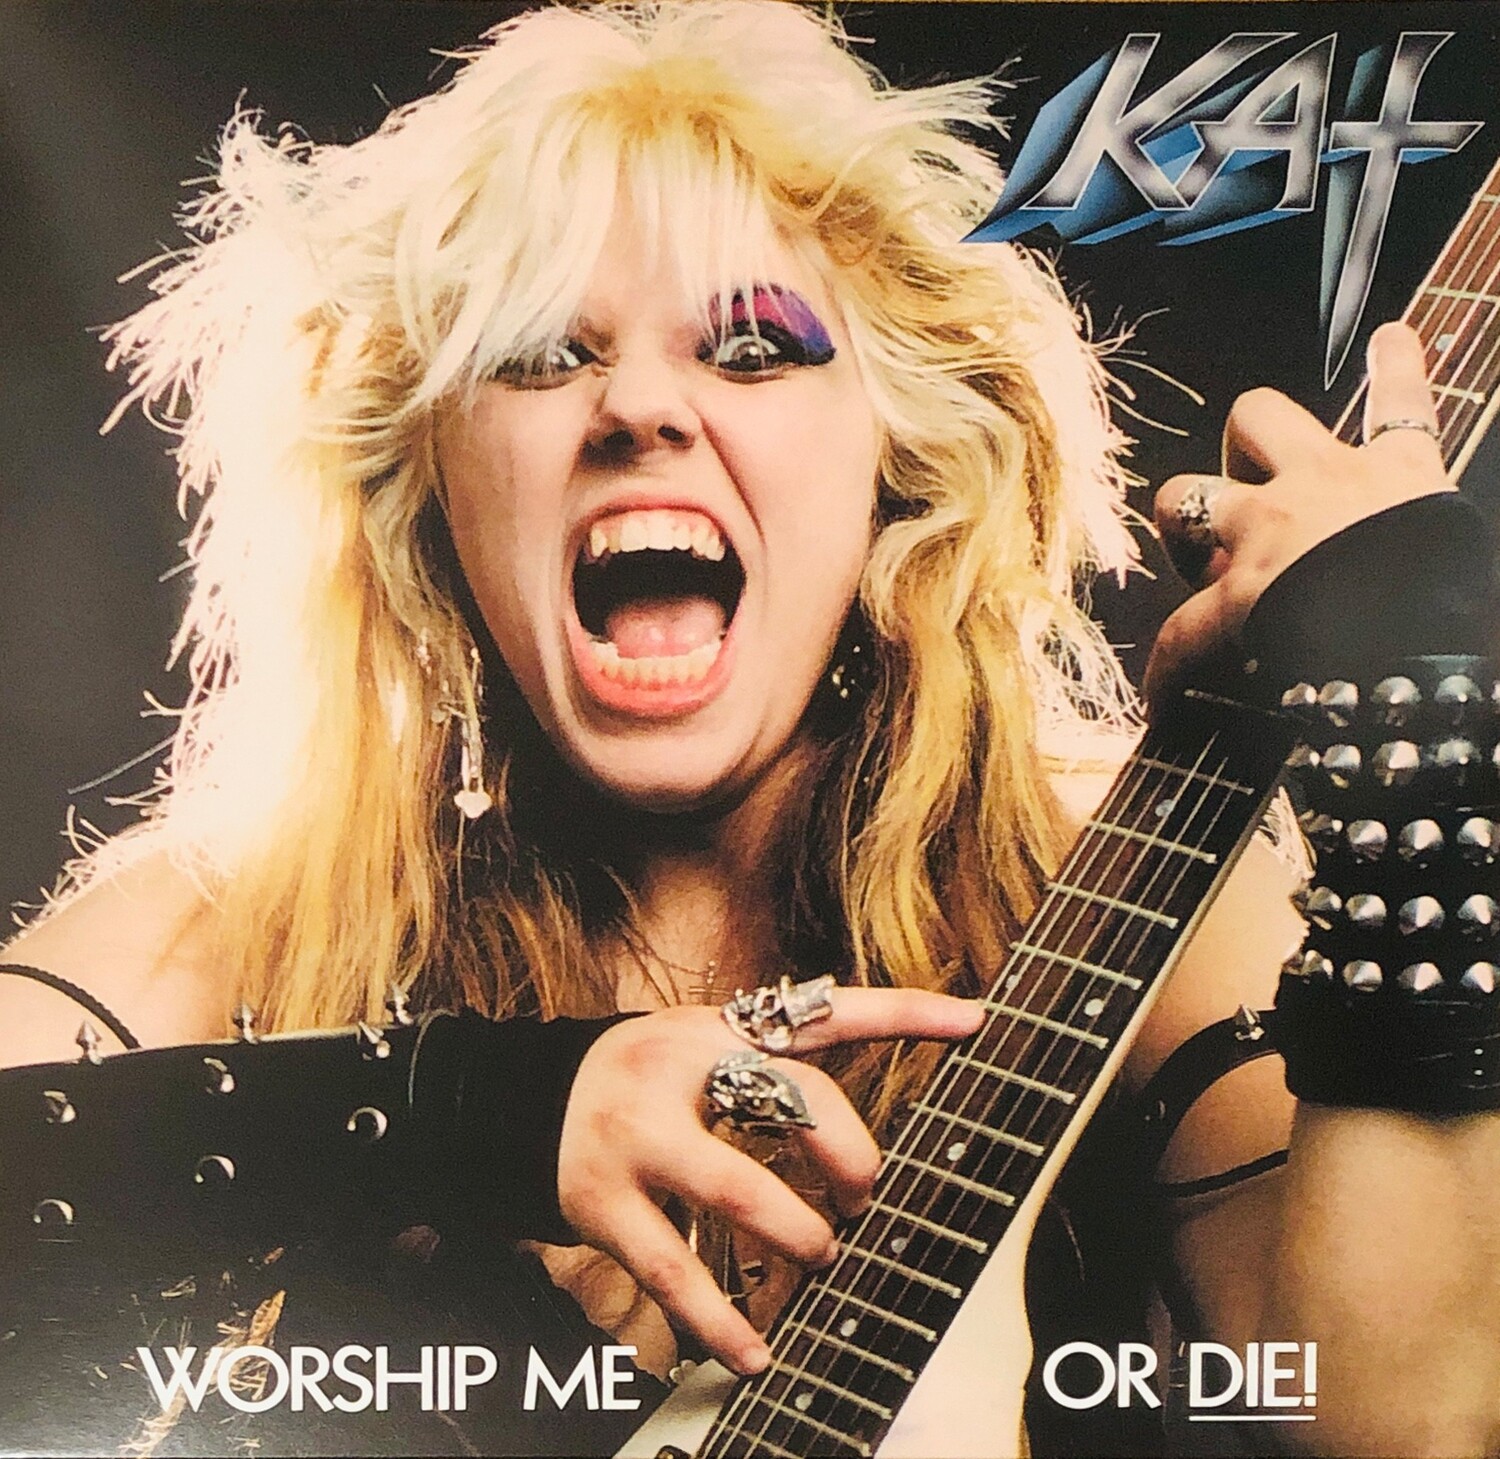 “WORSHIP ME OR DIE!” VINYL DEBUT ALBUM RECORD OR "SATAN SAYS" VINYL EP RECORD! PERSONALIZED AUTOGRAPHED by THE GREAT KAT! INFO IS BELOW! (Signed to Customer) Limited Quantities!!